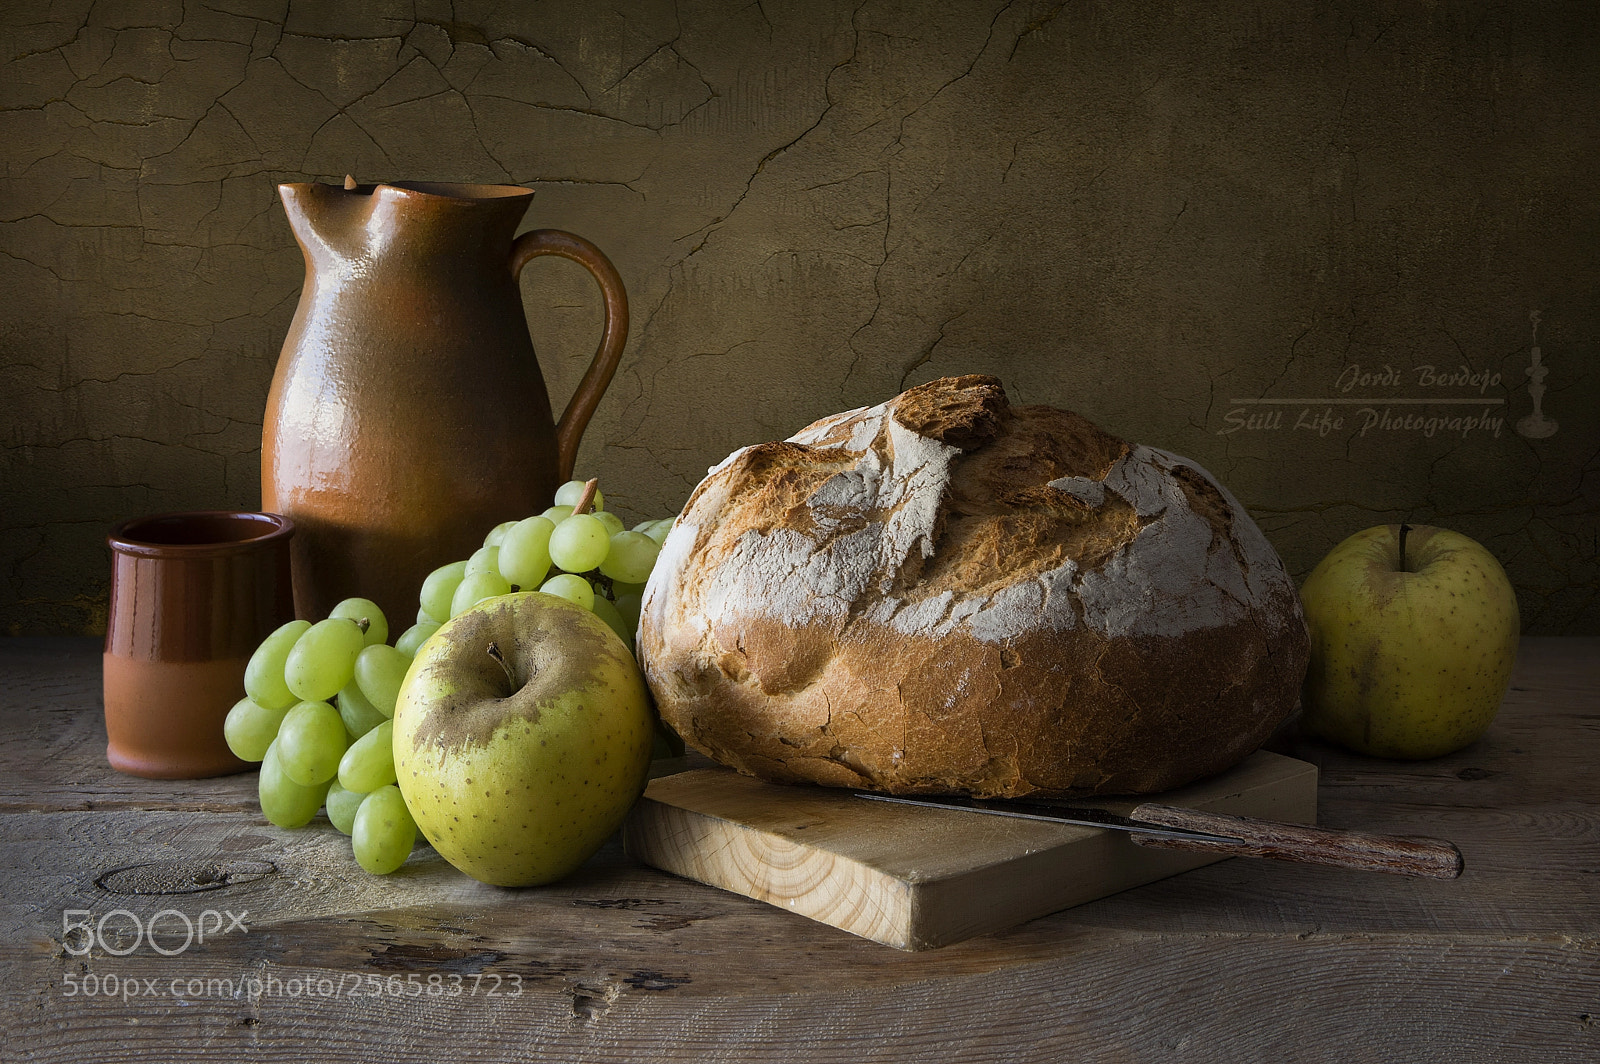 Pentax K-3 II sample photo. Bread, wine and fruits photography